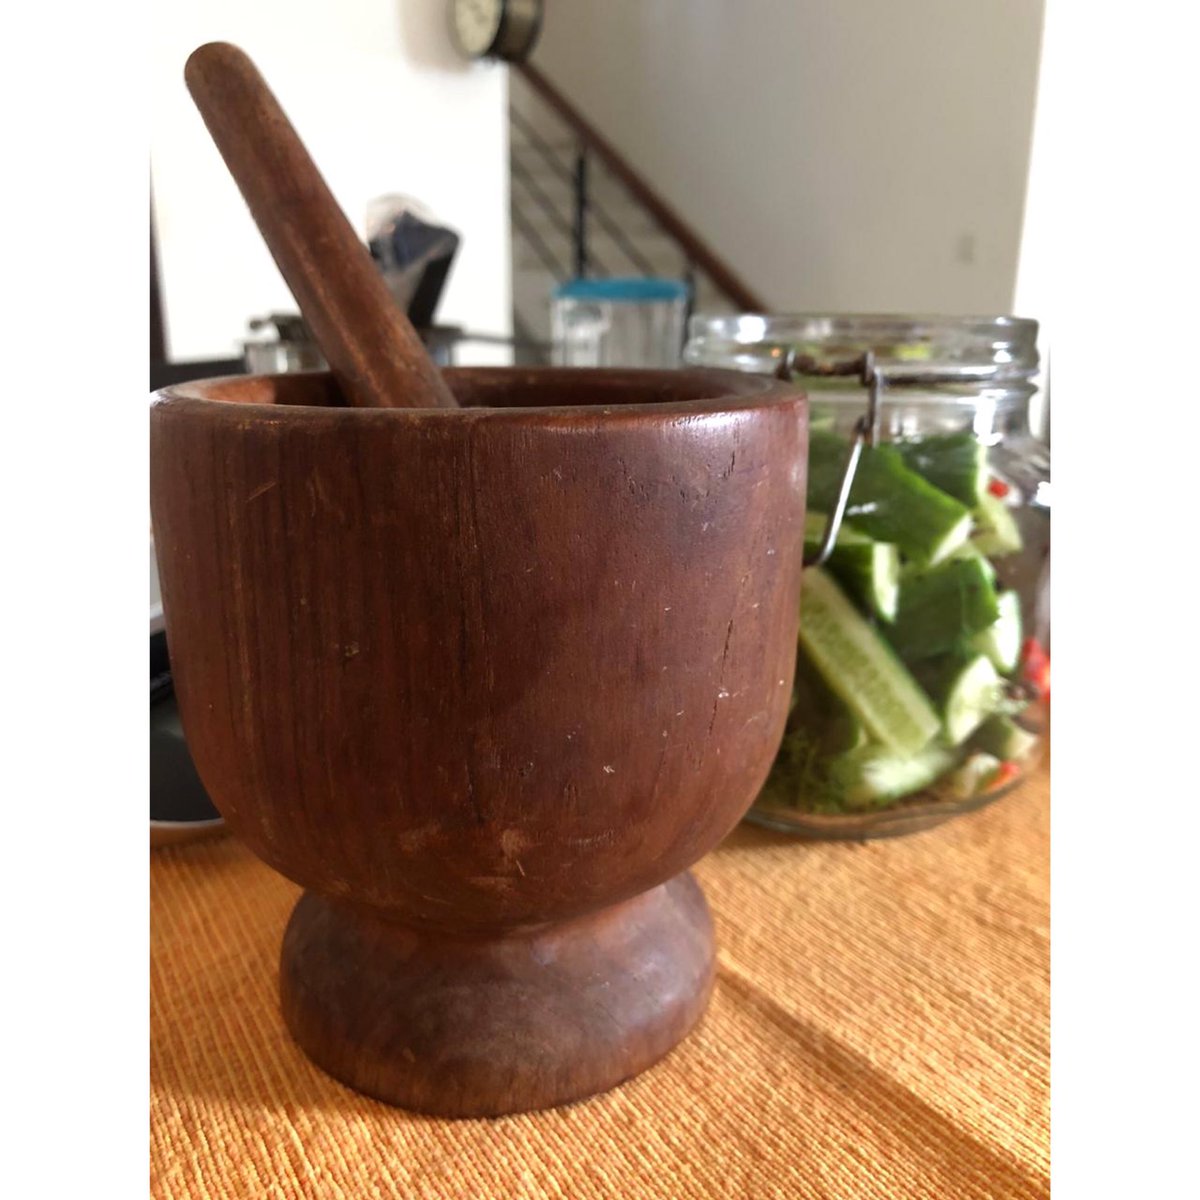 ओ is for ओखल / Okhal or Mortar, a device used for crushing, pounding or grinding flour, spices, and other ingredients with a मूसल or pestle. Traditionally made from stone, metal or wood, the okhal is an integral part of Indian kitchens. #AksharArt  #ArtByTheLetter